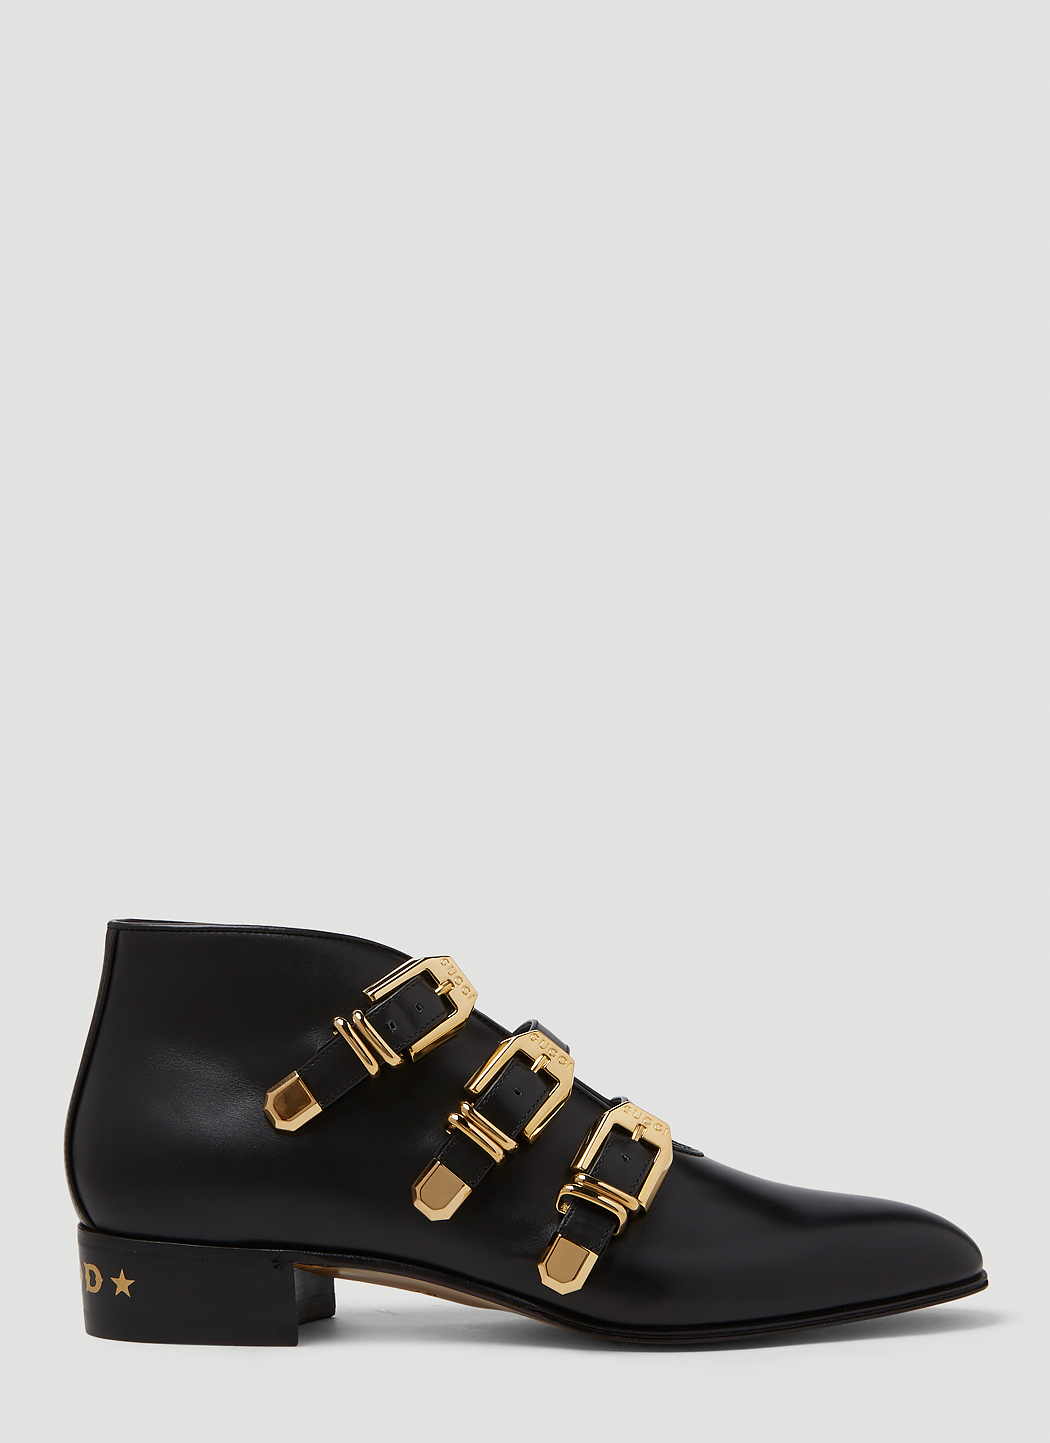 Hollywood Buckle Ankle Boots